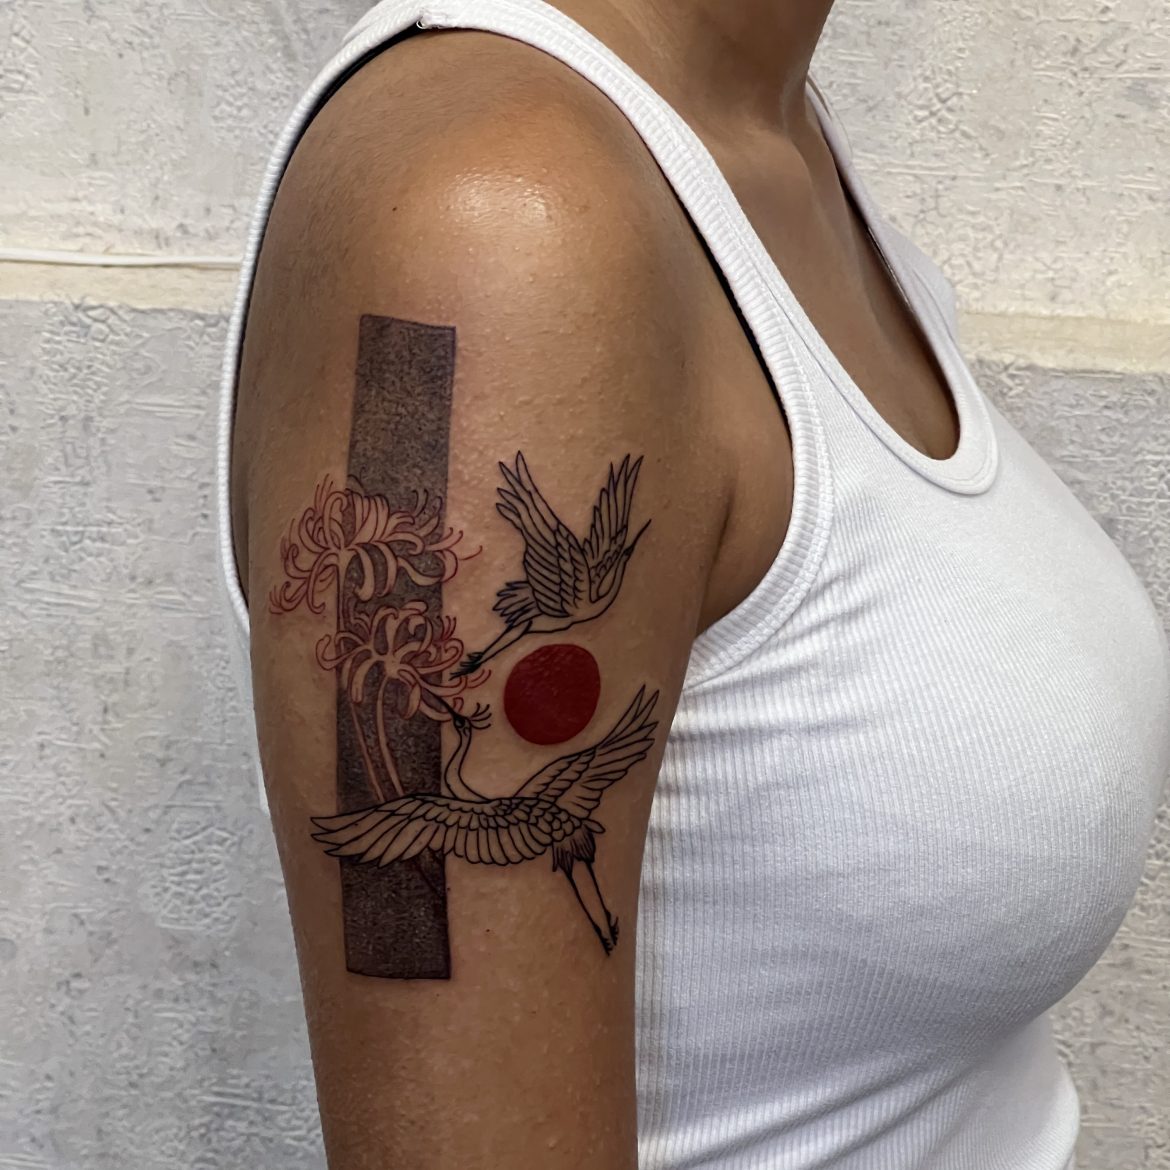 Dotted' designs, a new trend in tattoos - Times of India